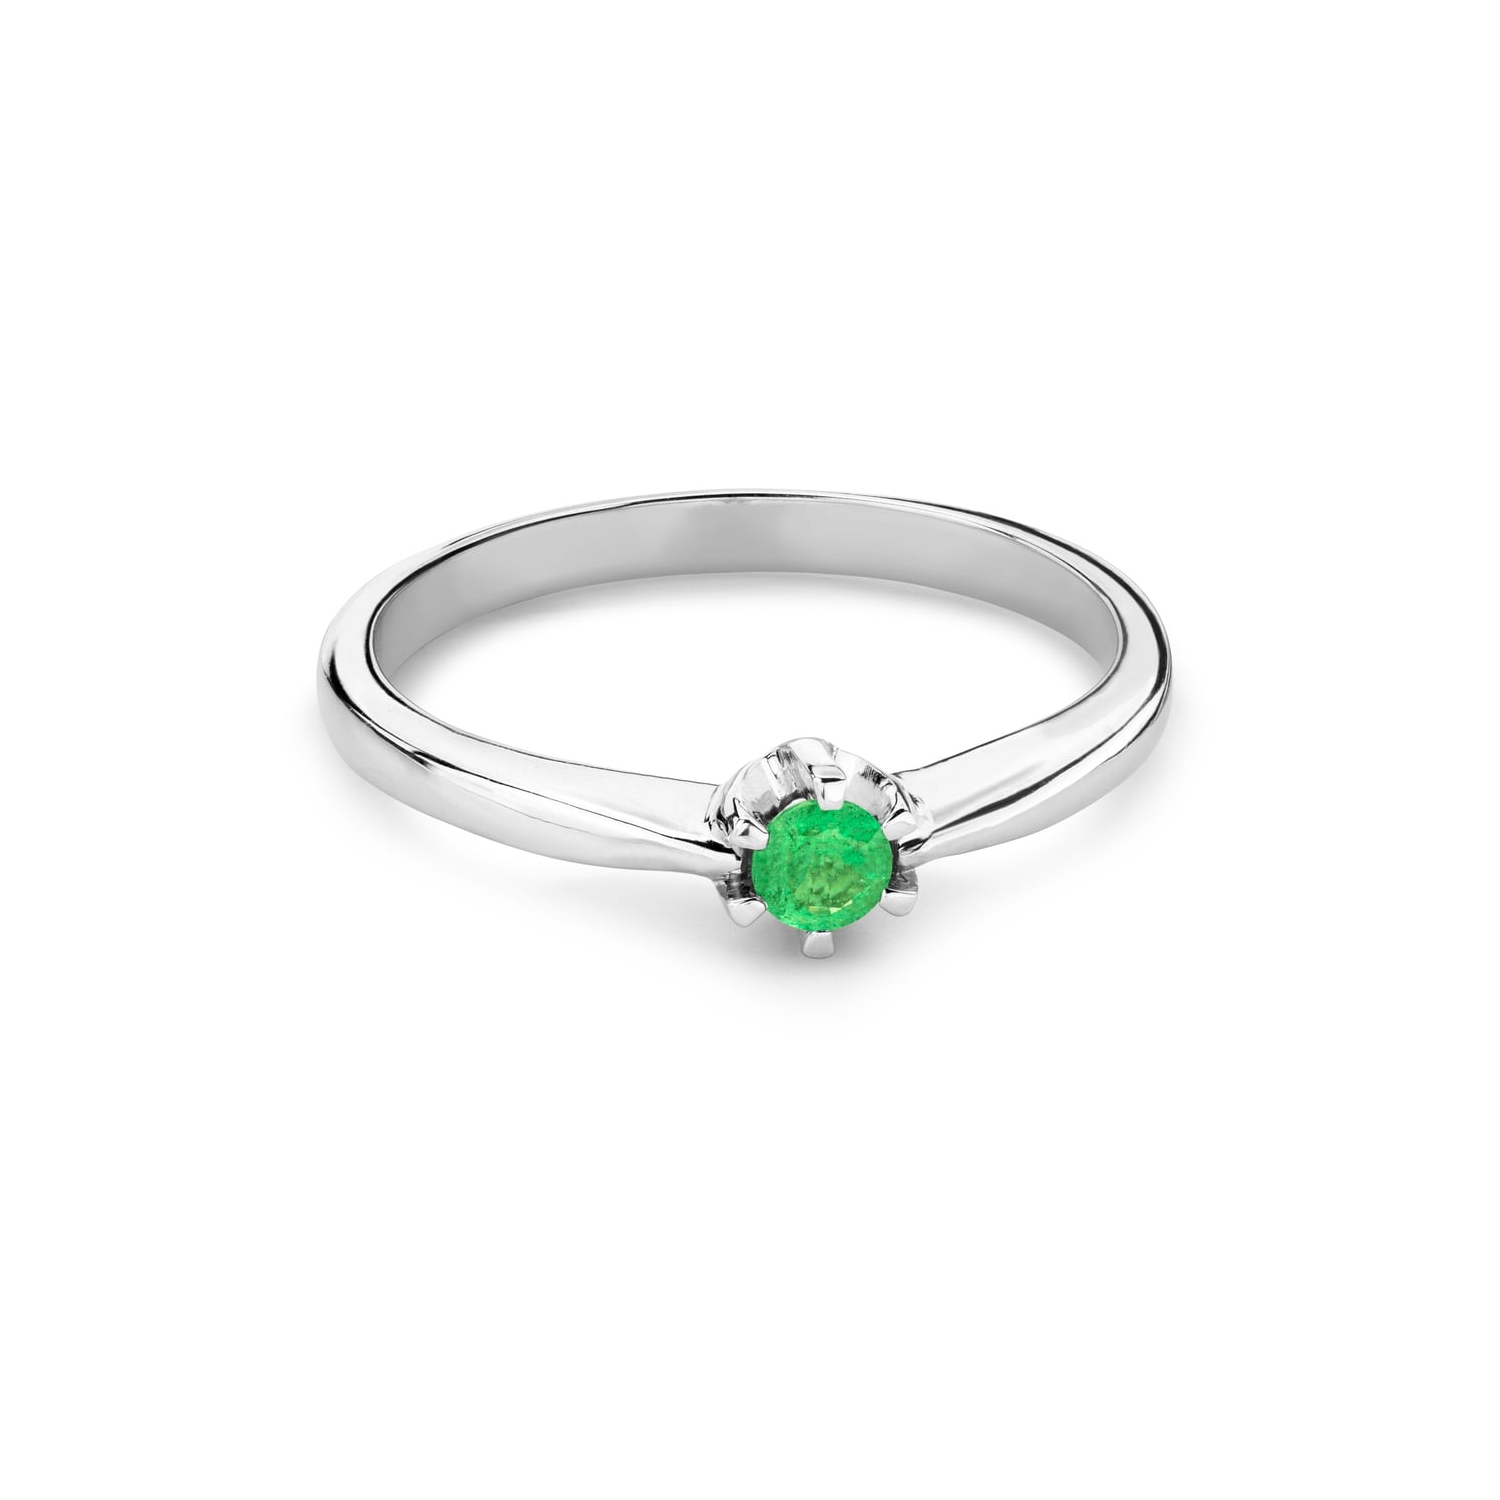 Engagement ring with gemstones "Emerald 67"